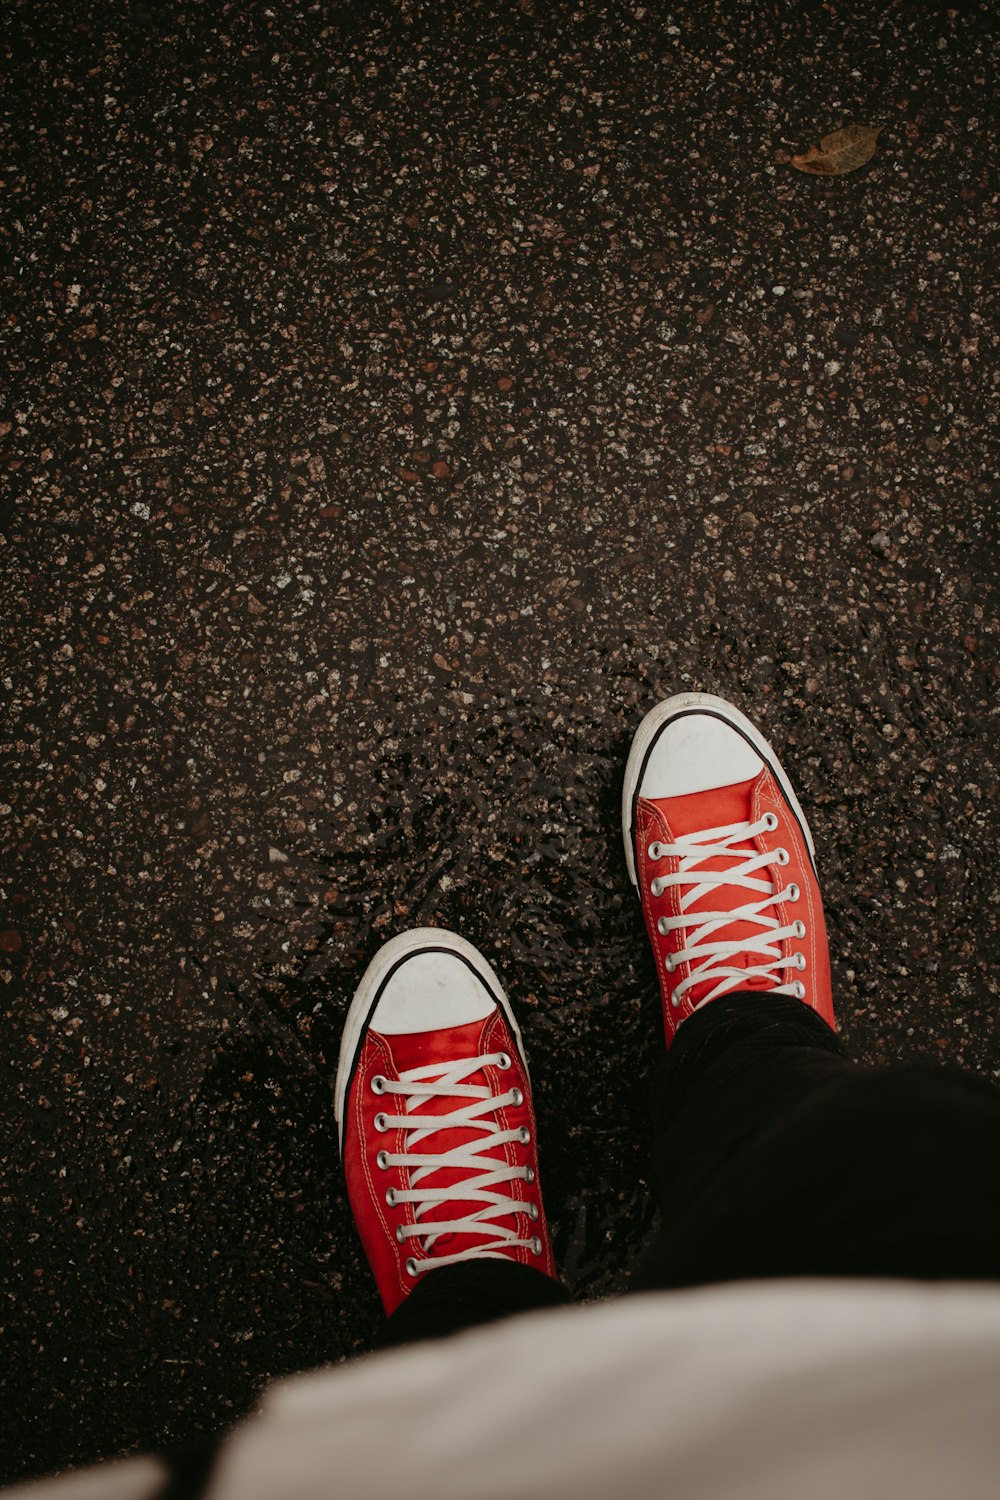 a person wearing red sneakers standing on a sidewalk